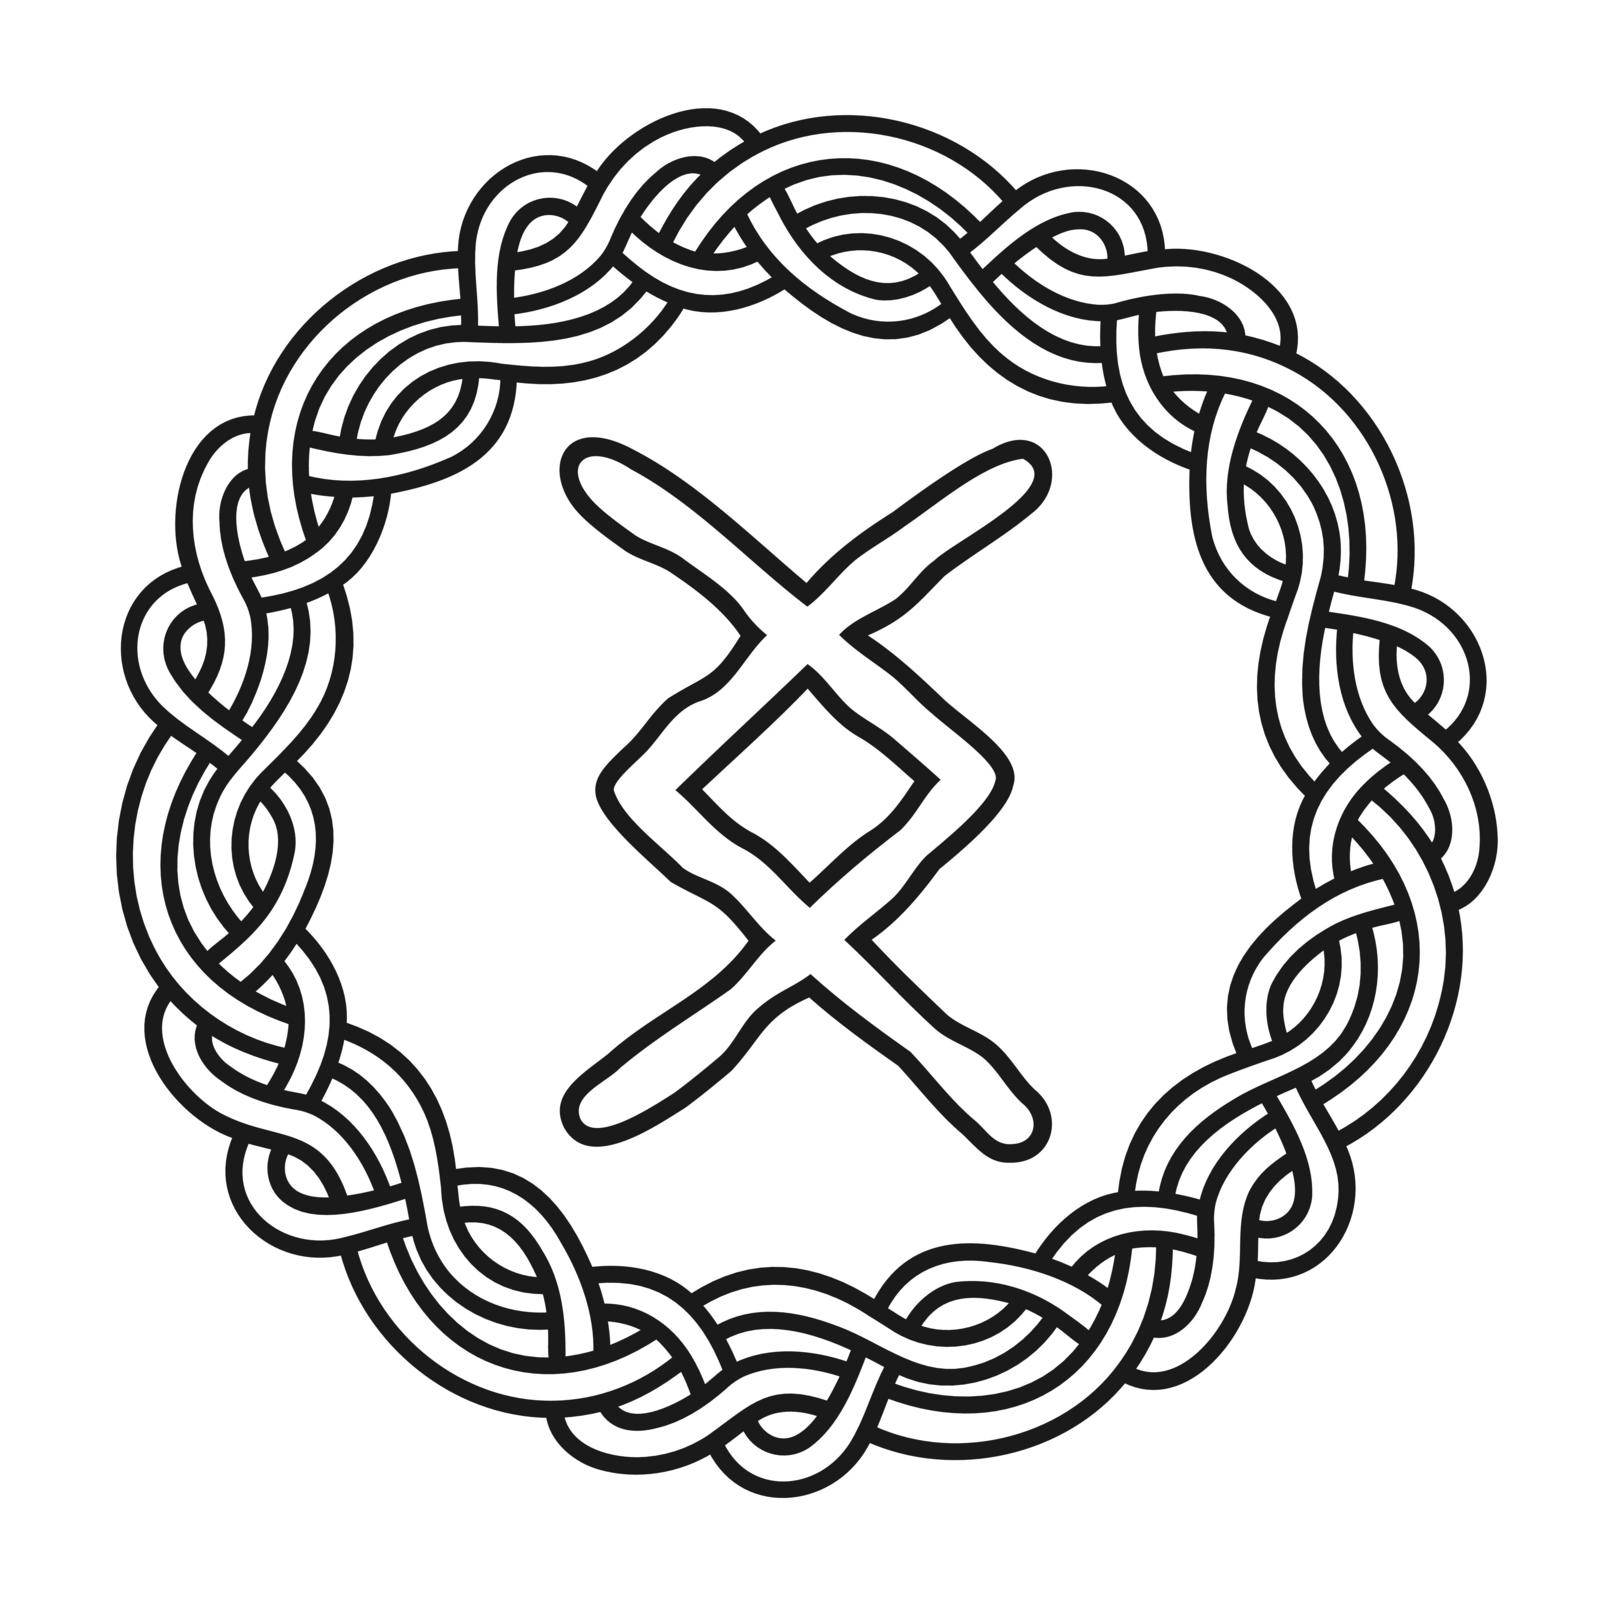 Rune Inguz Ingwaz in a circle - an ancient Scandinavian symbol or sign, amulet. Viking writing. Hand drawn outline vector illustration for websites, games, print and engraving.